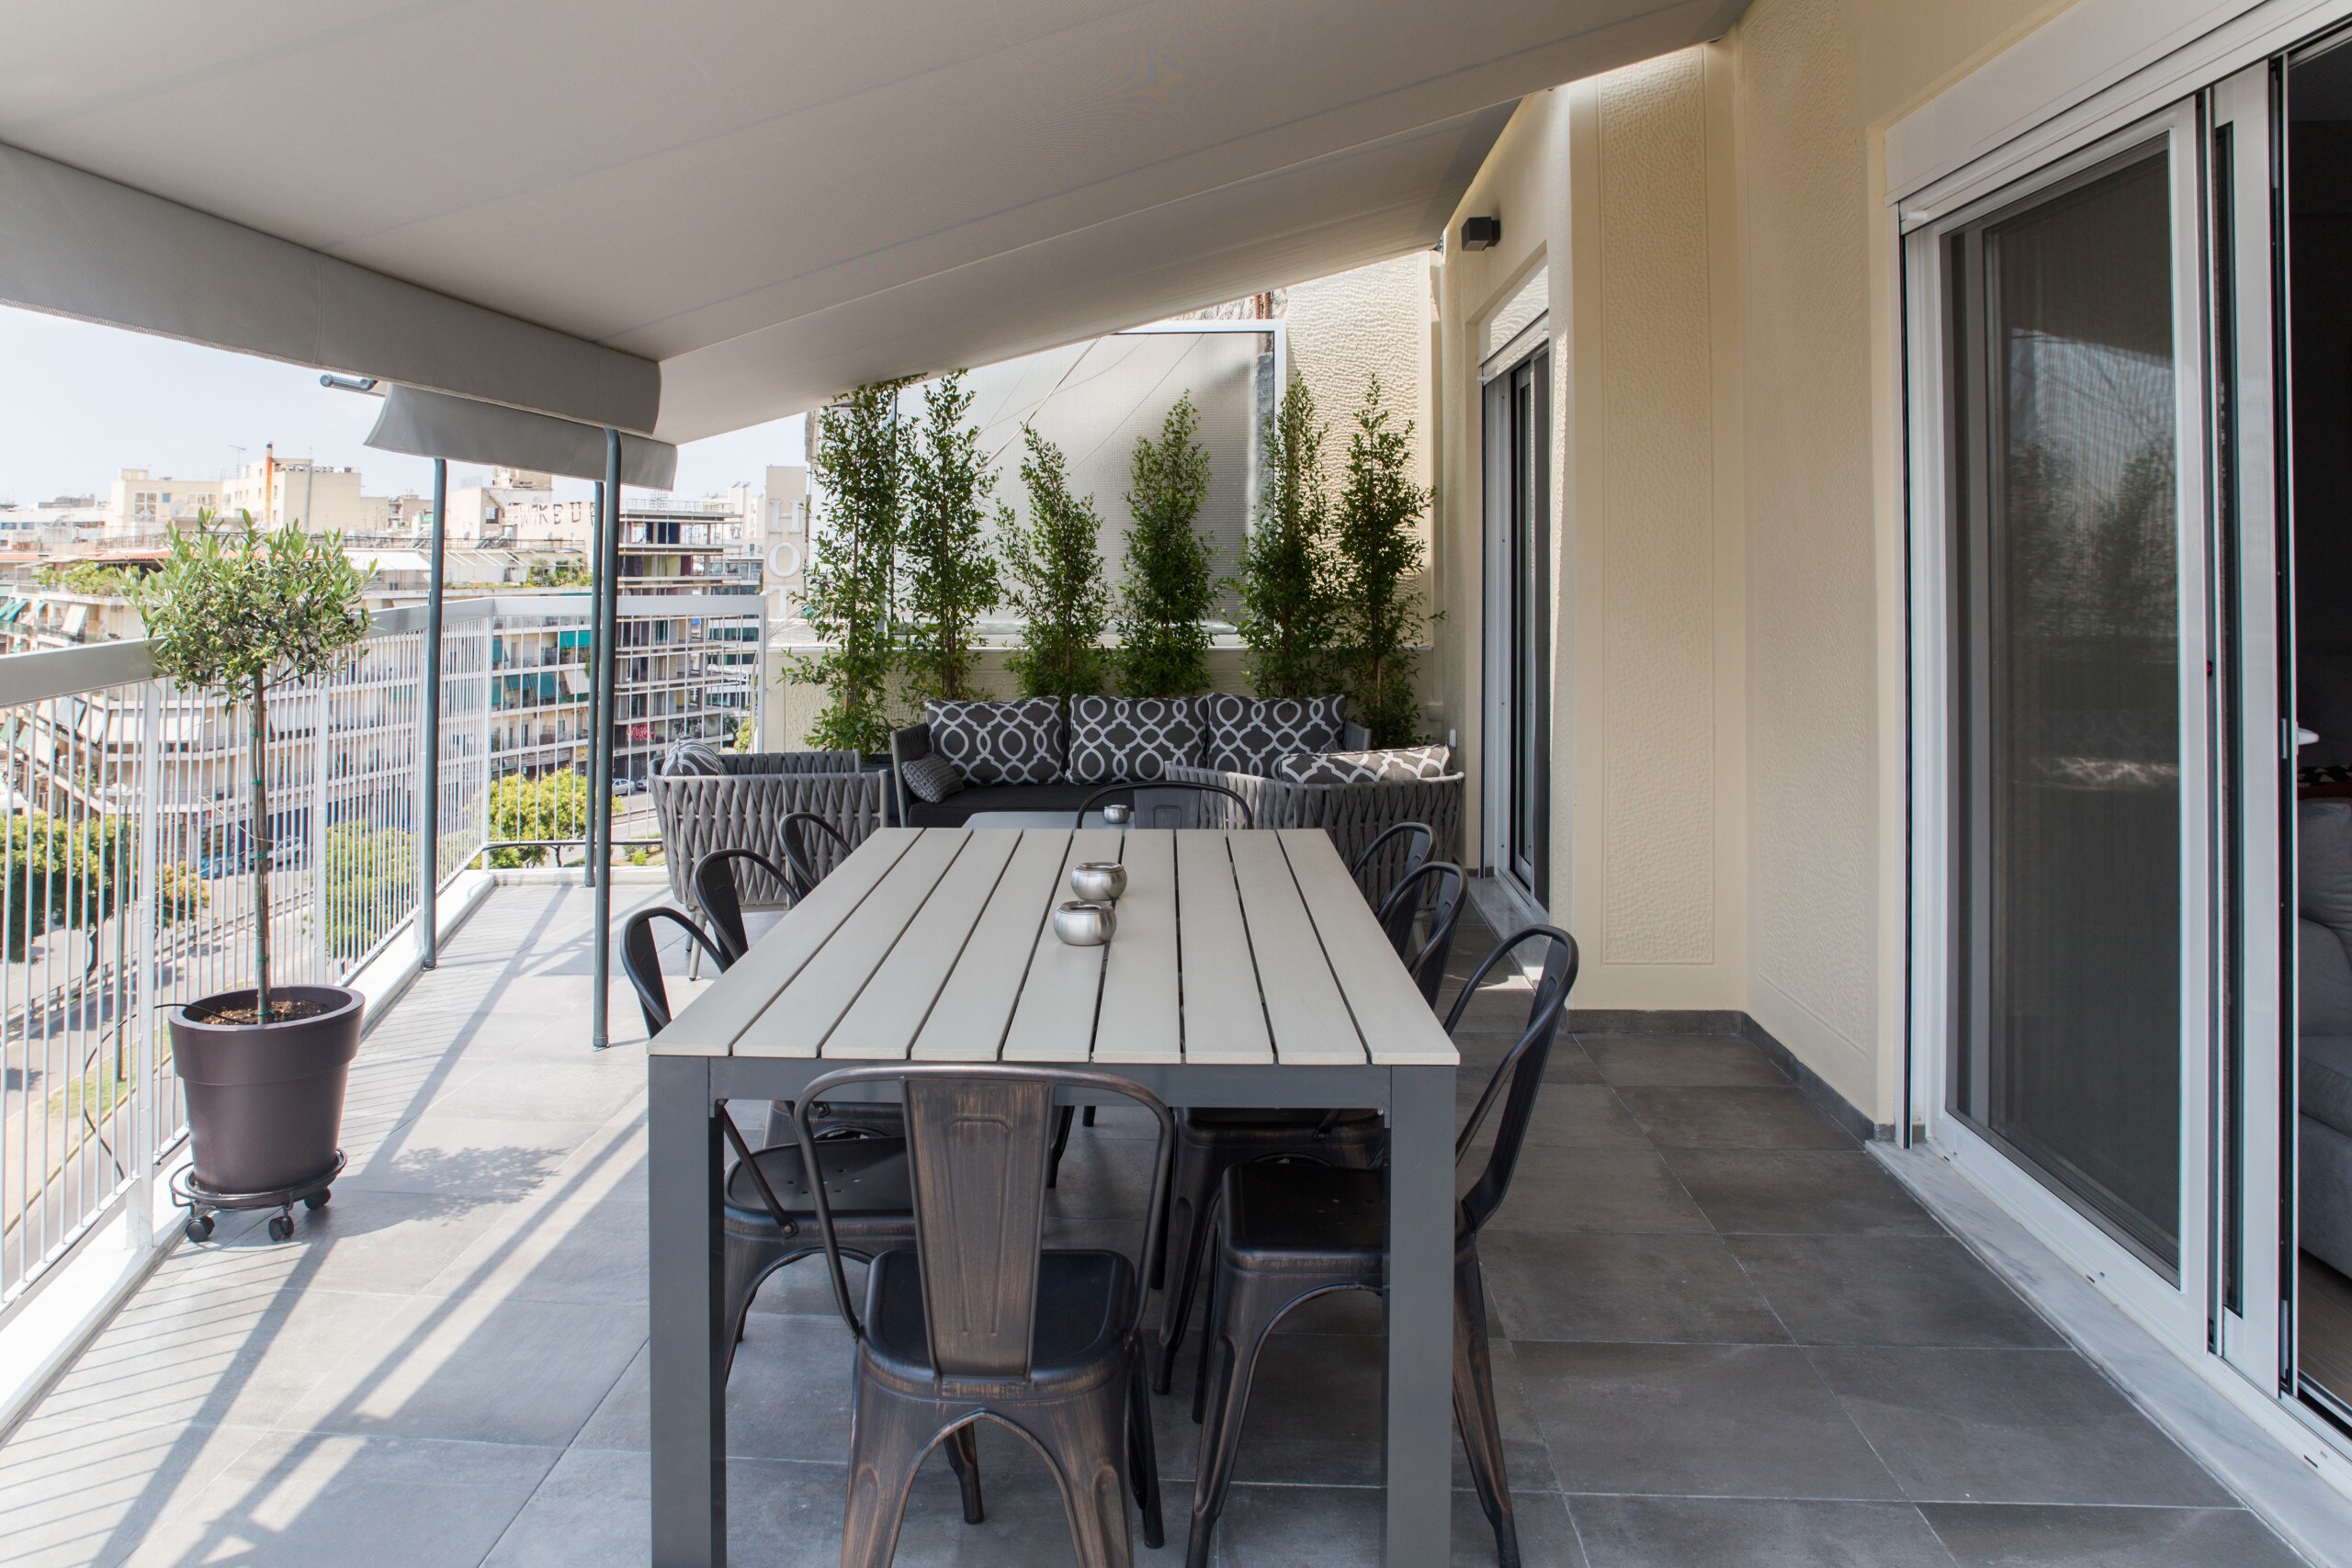 You will love your big private terrace on the top floor of the apartment, with a dining table and chairs and even a seating area. The big tends can be opened and protect you from the hot sunny days, but if you want you can even close them